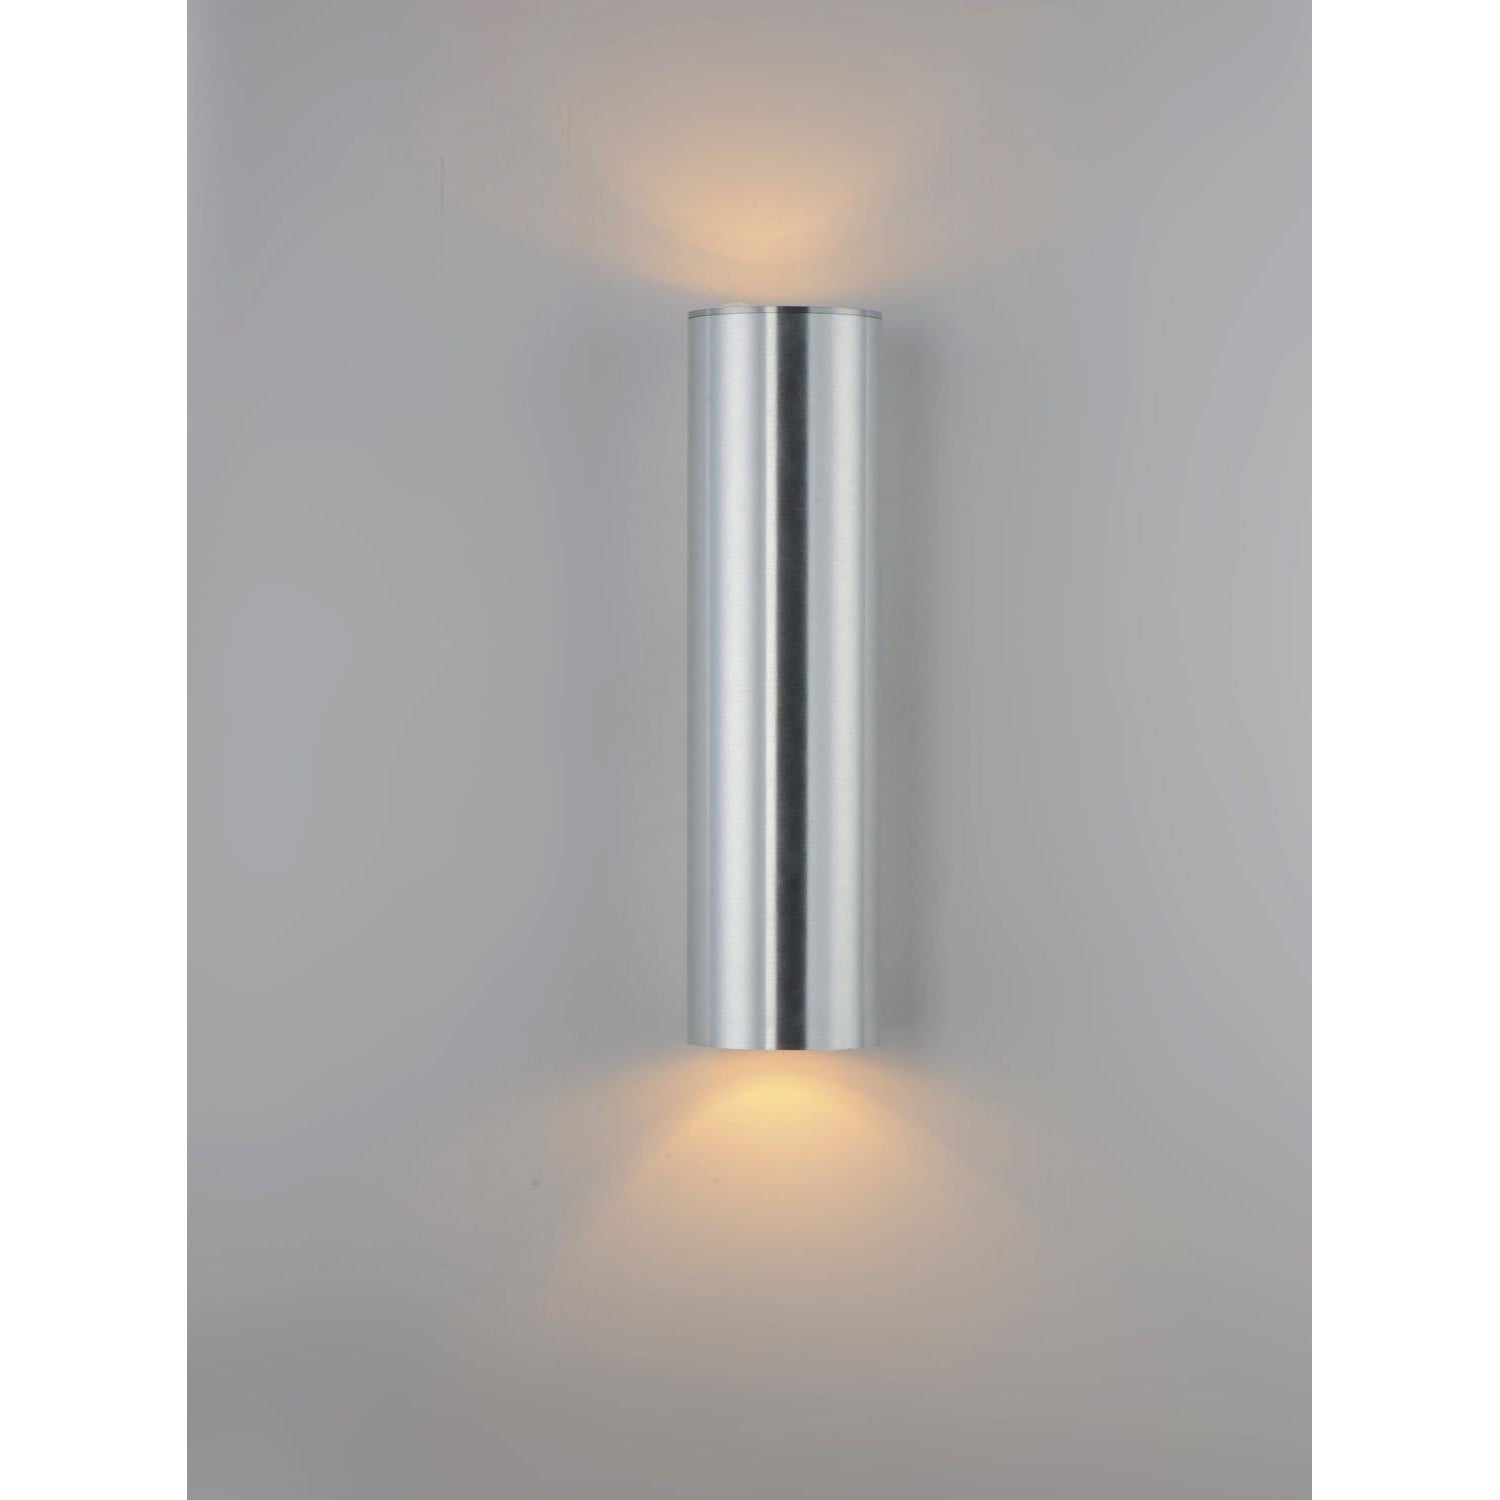 Outpost Outdoor Wall Light Brushed Aluminum